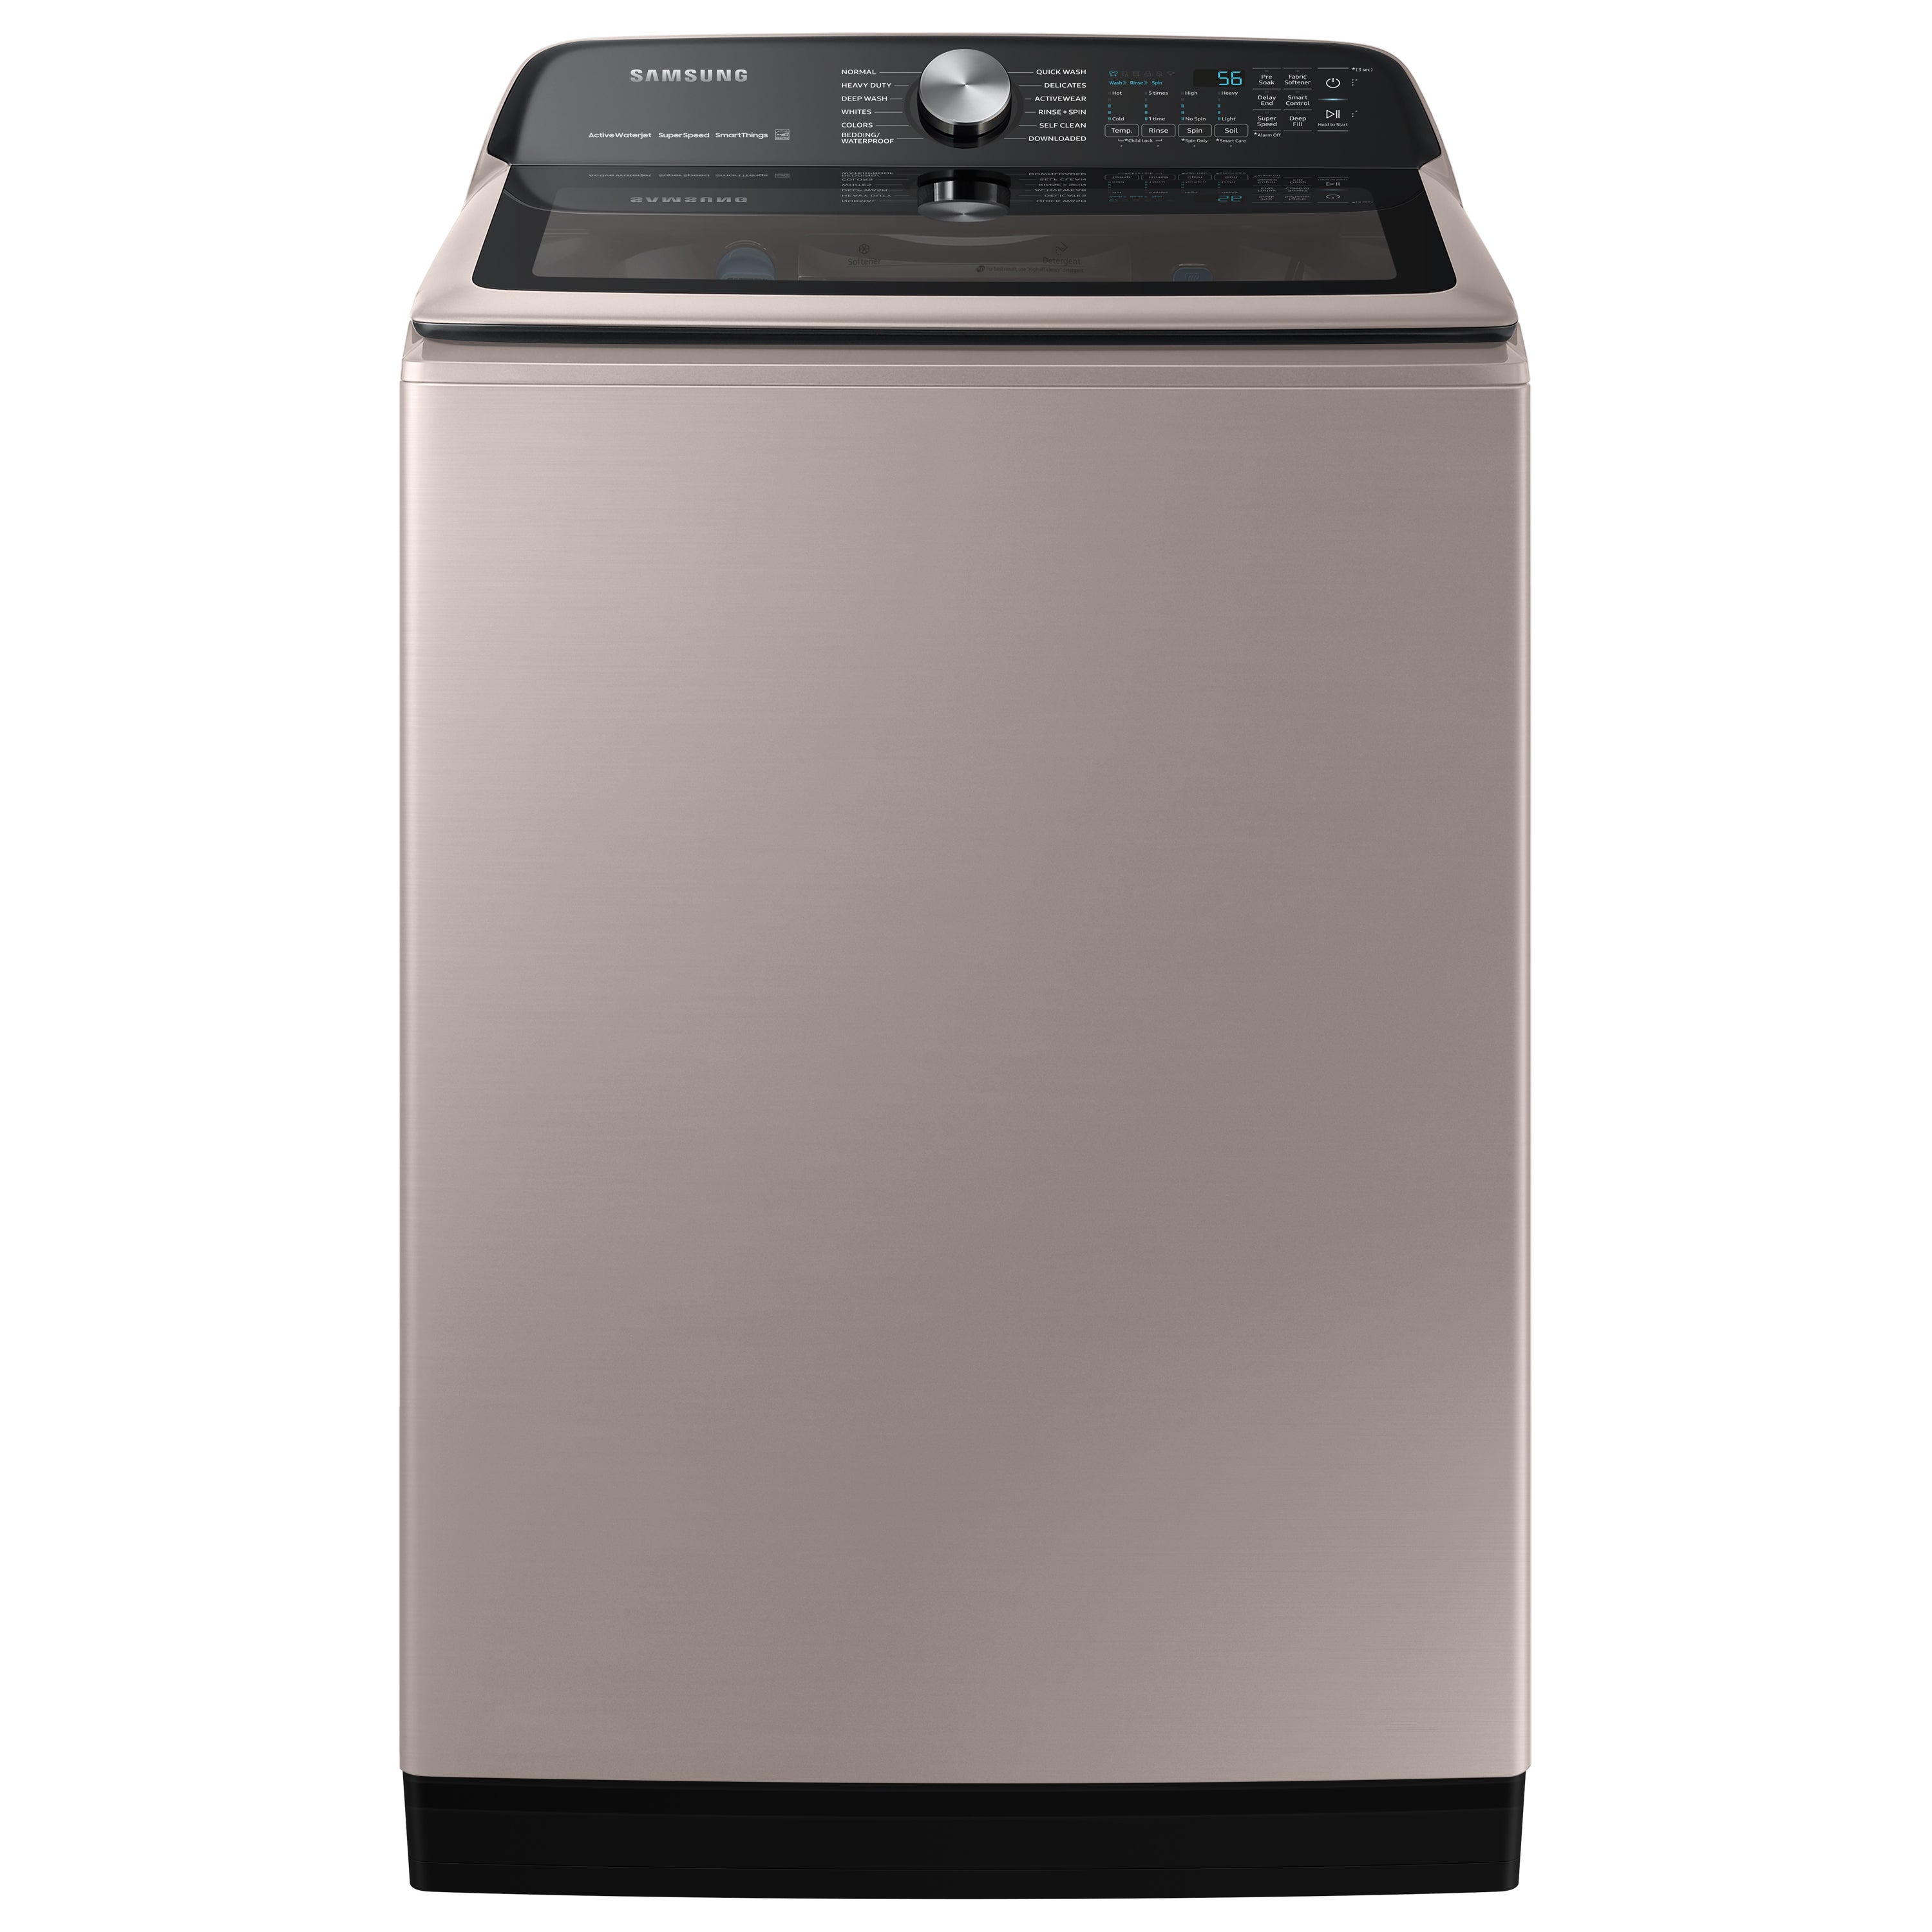 The best laundry load size for your Samsung washing machine and dryer